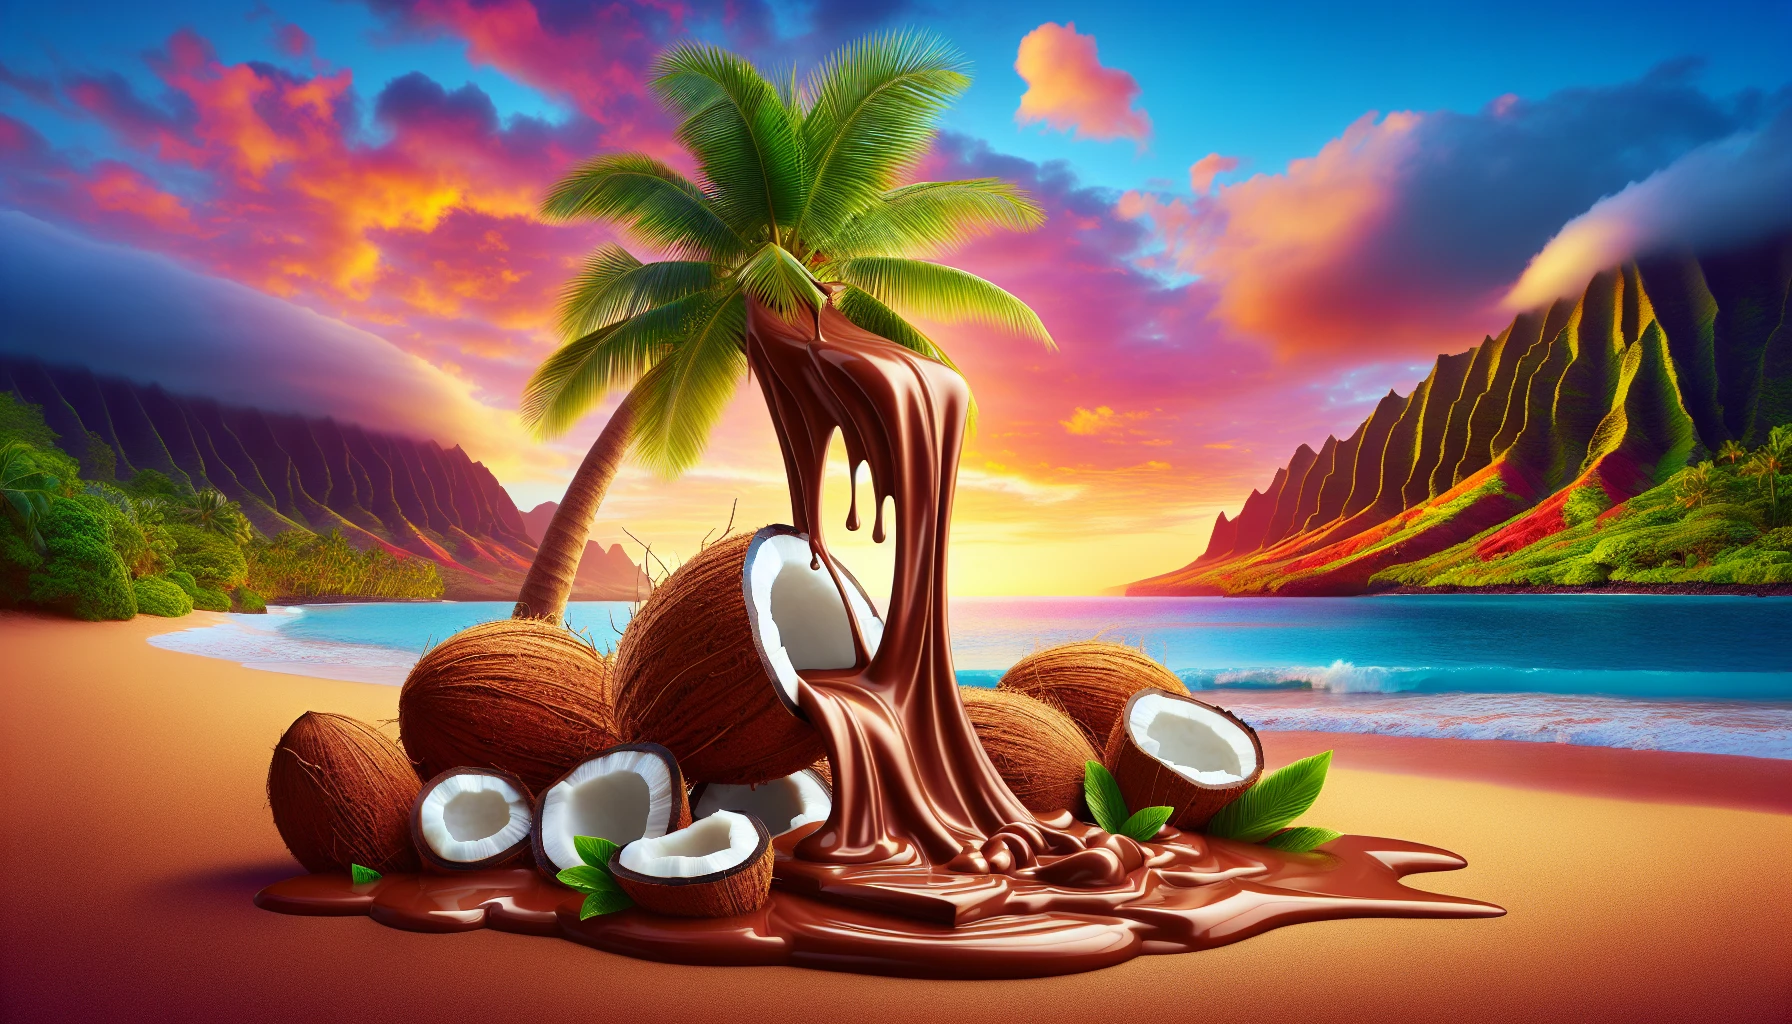 A tropical-themed illustration featuring coconut and chocolate elements